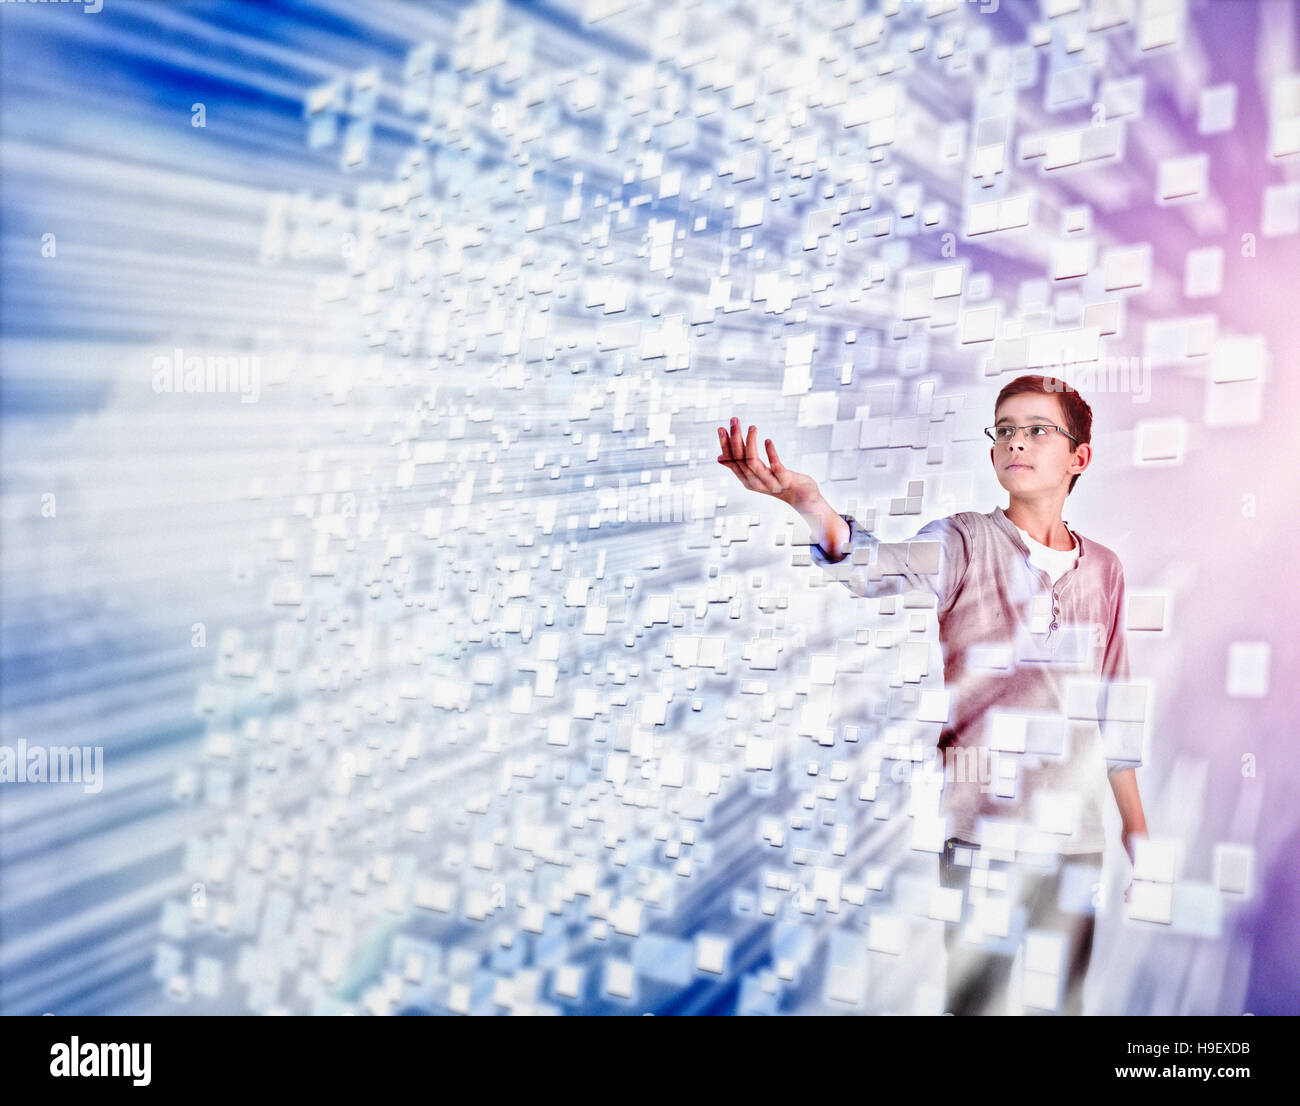 Mixed Race boy reaching for hovering pixels Stock Photo